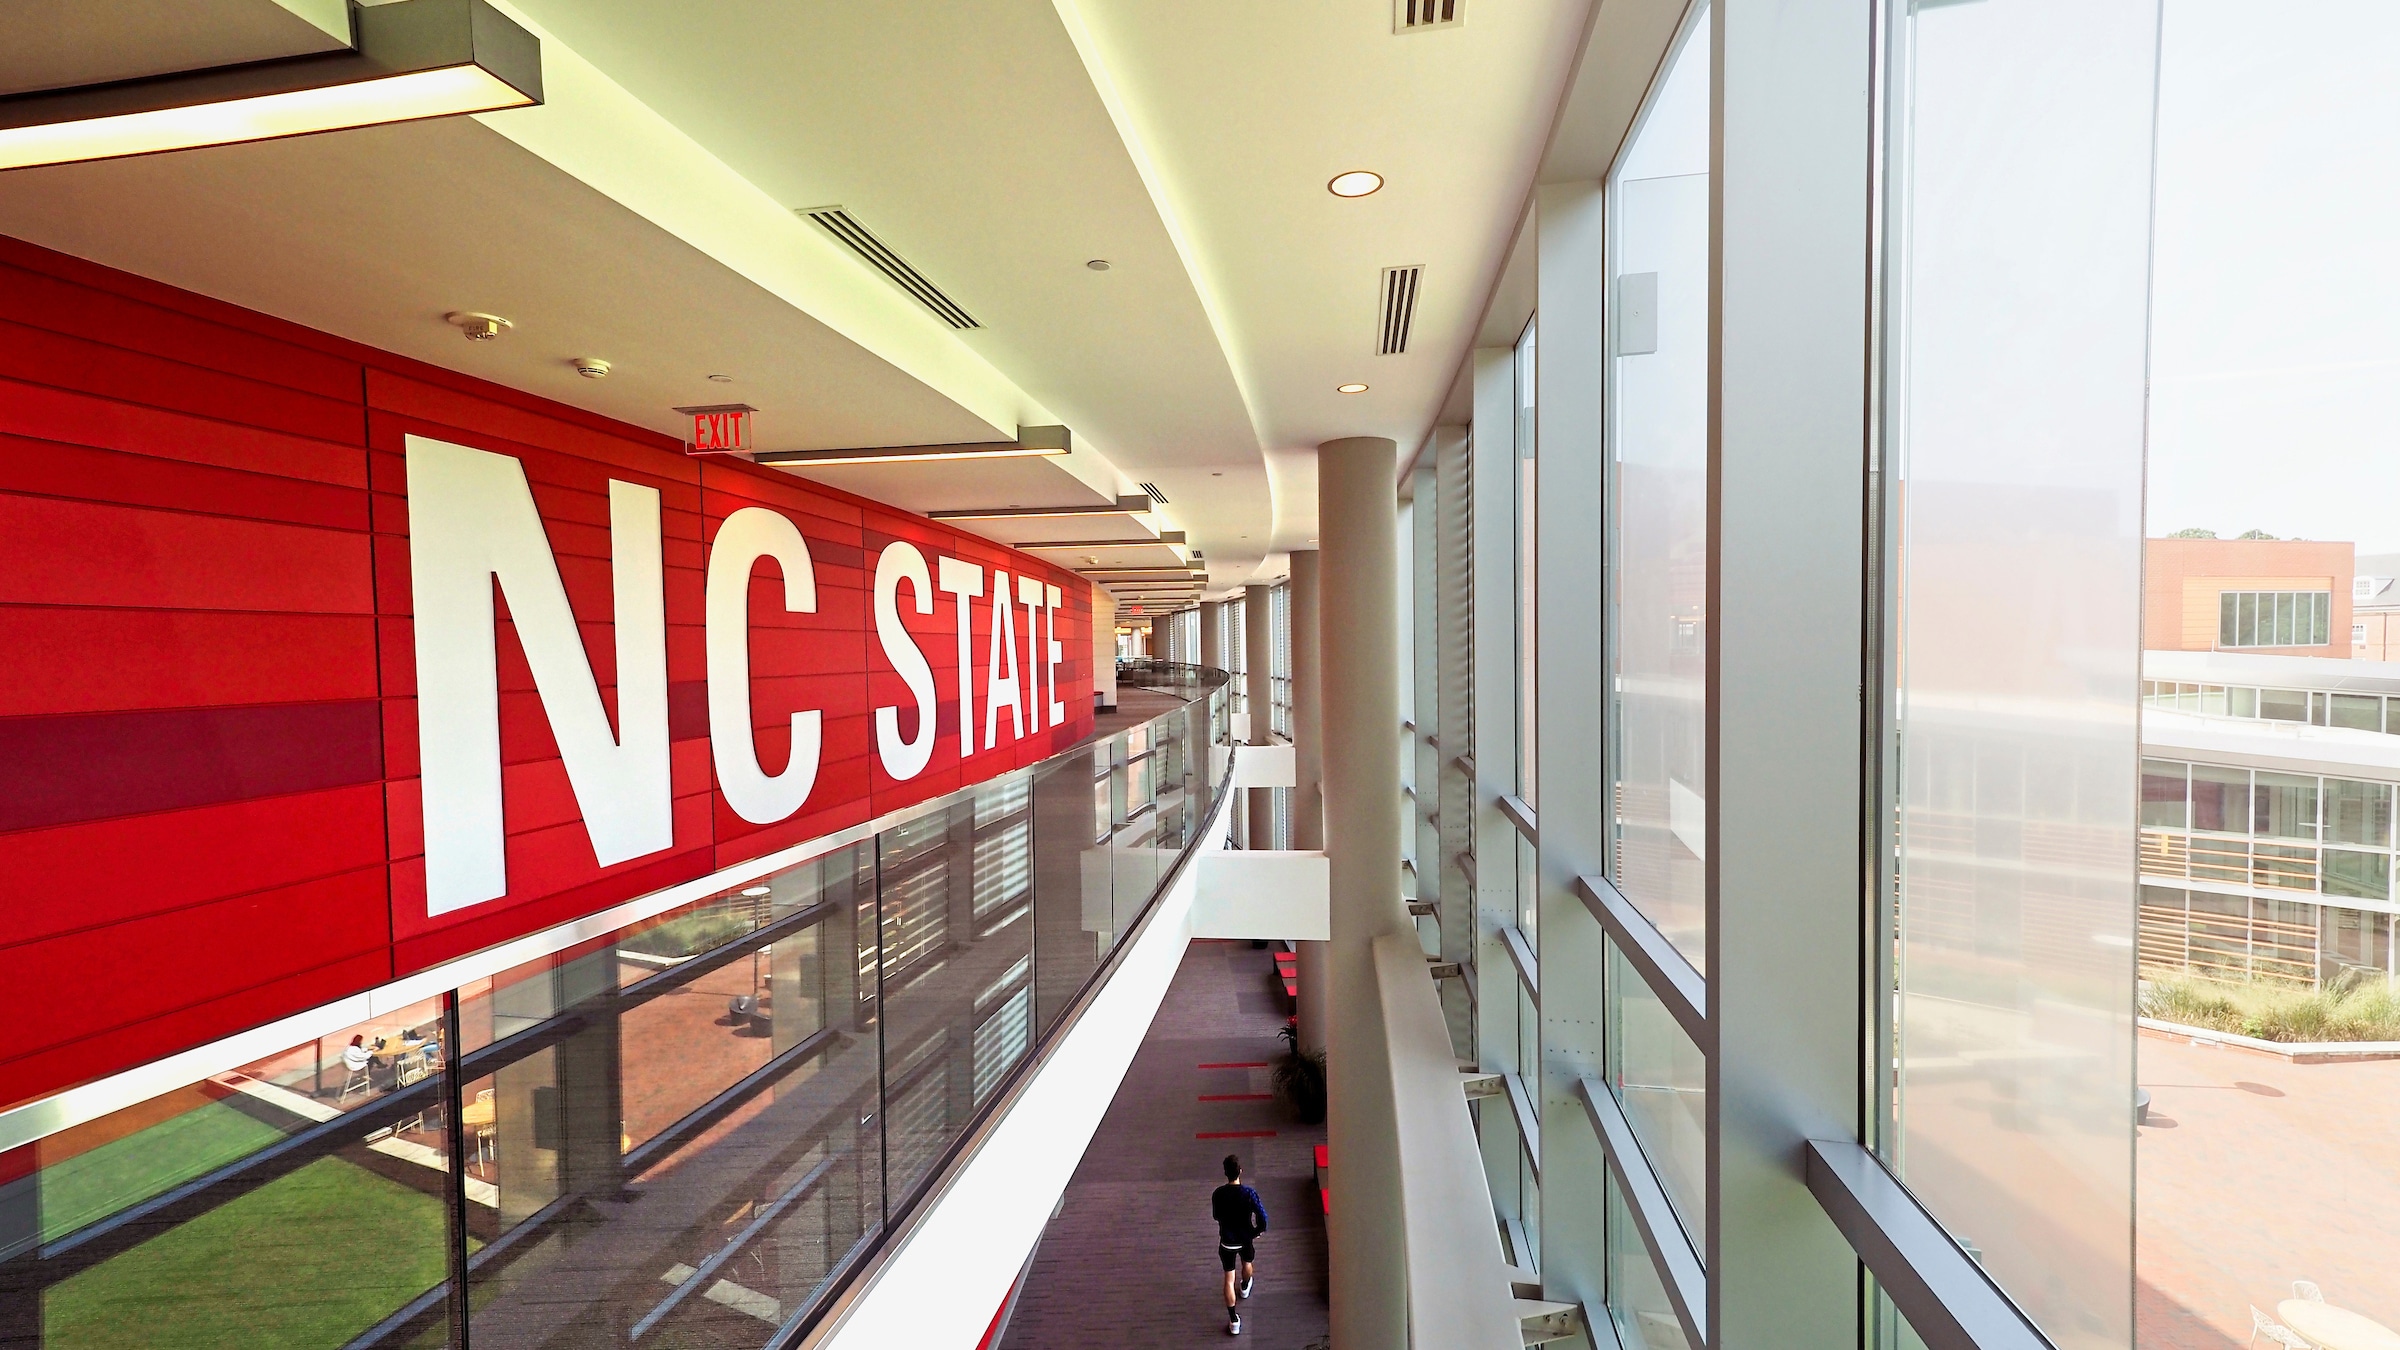 An interior of the Talley Student Union with the large NC State signage.